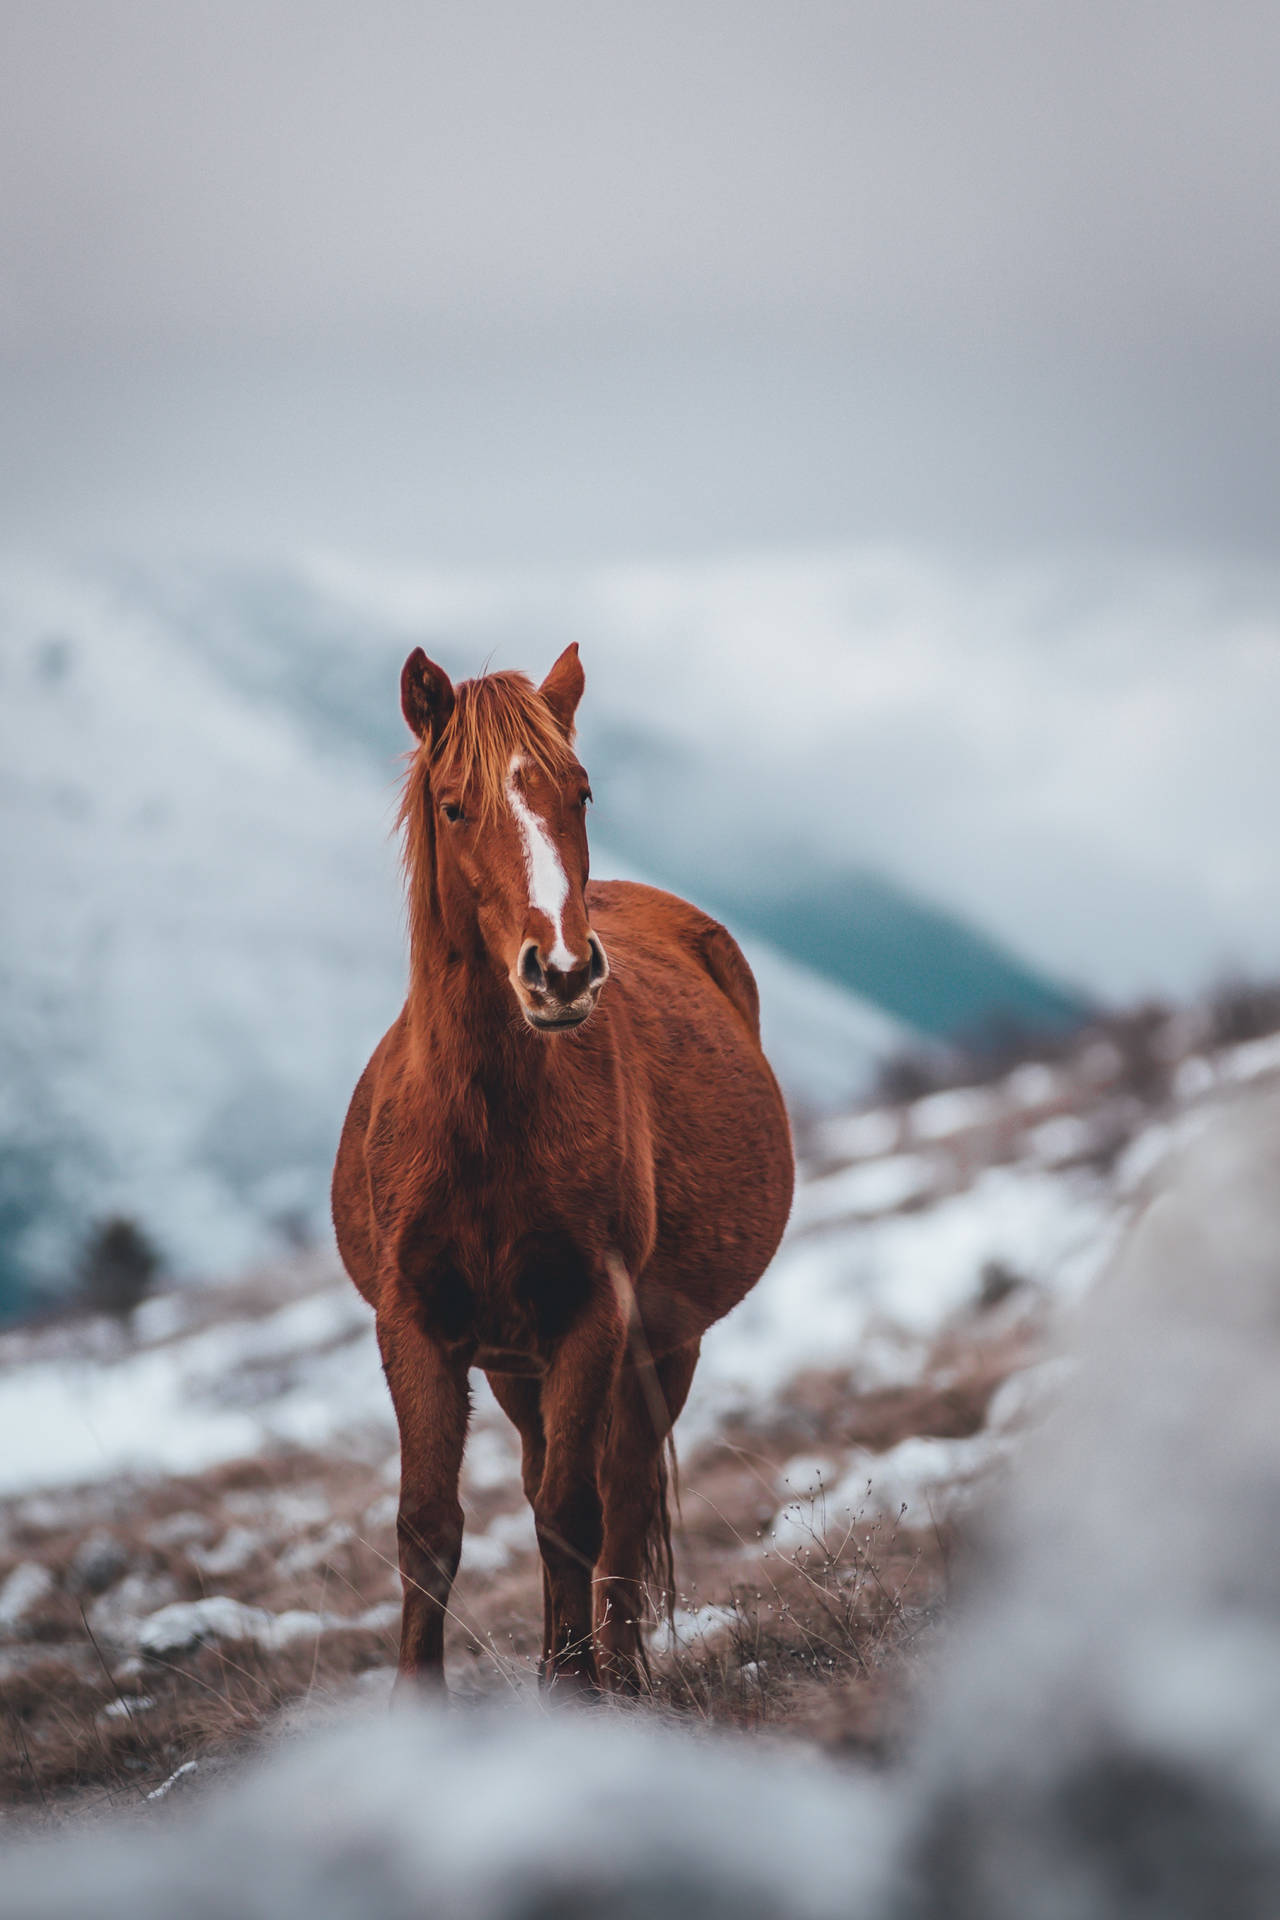 Snowy Mountainside Horse Iphone Wallpaper